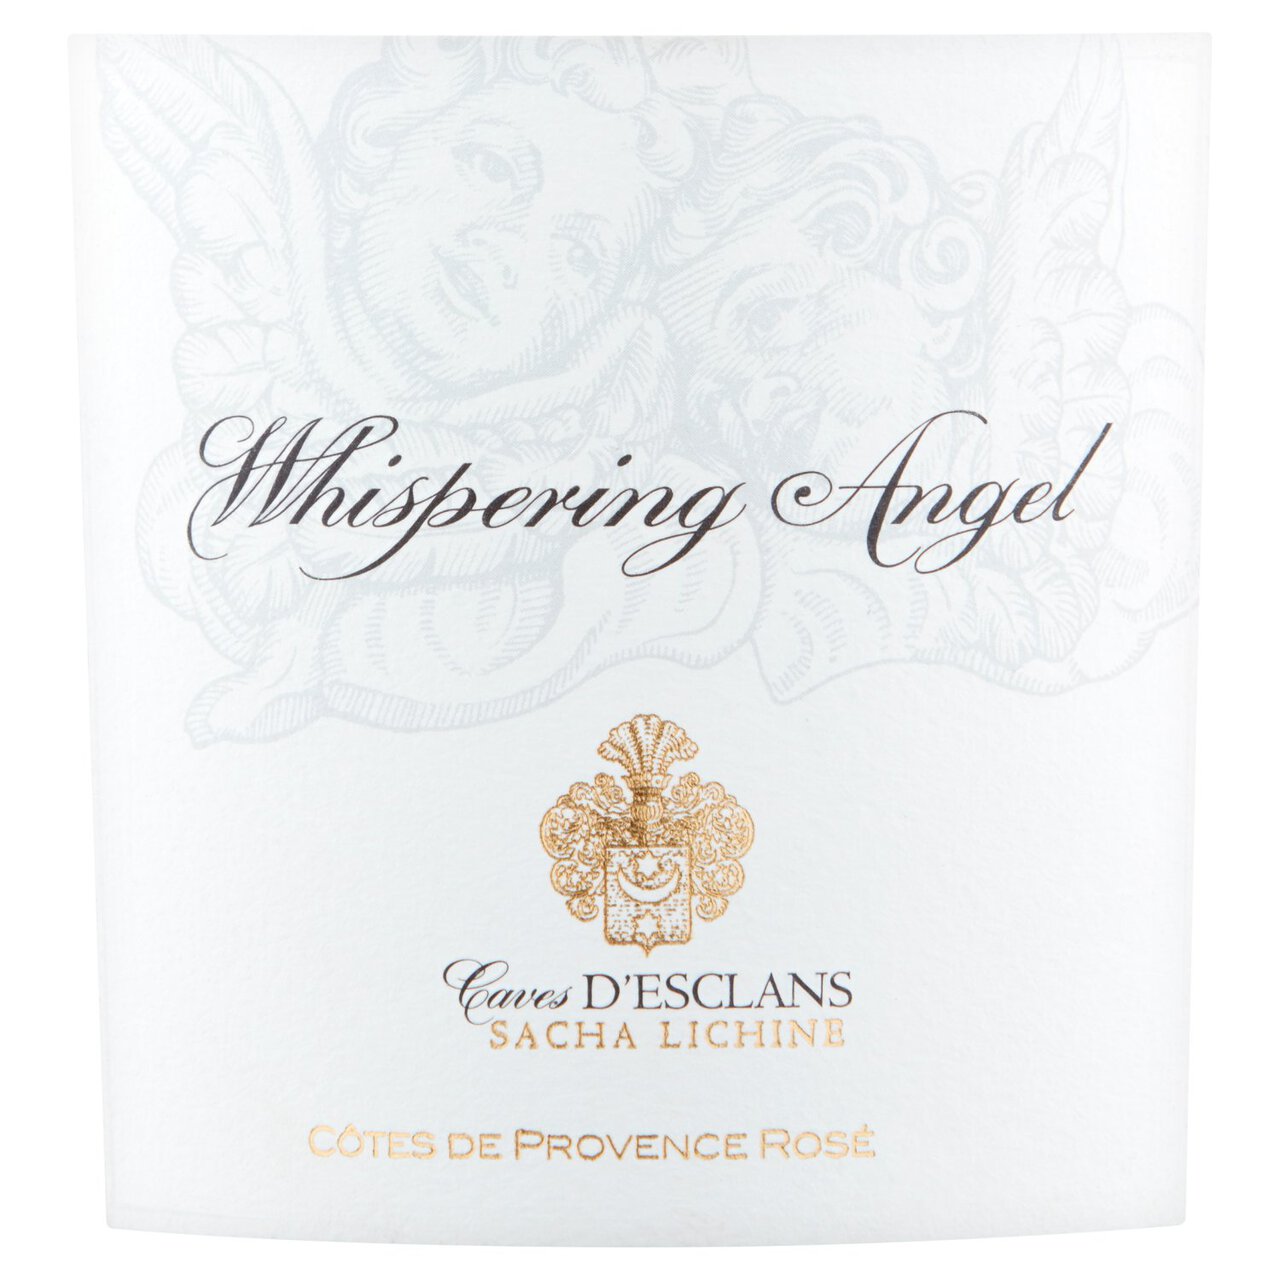 Whispering Angel Provence Rose 75cl